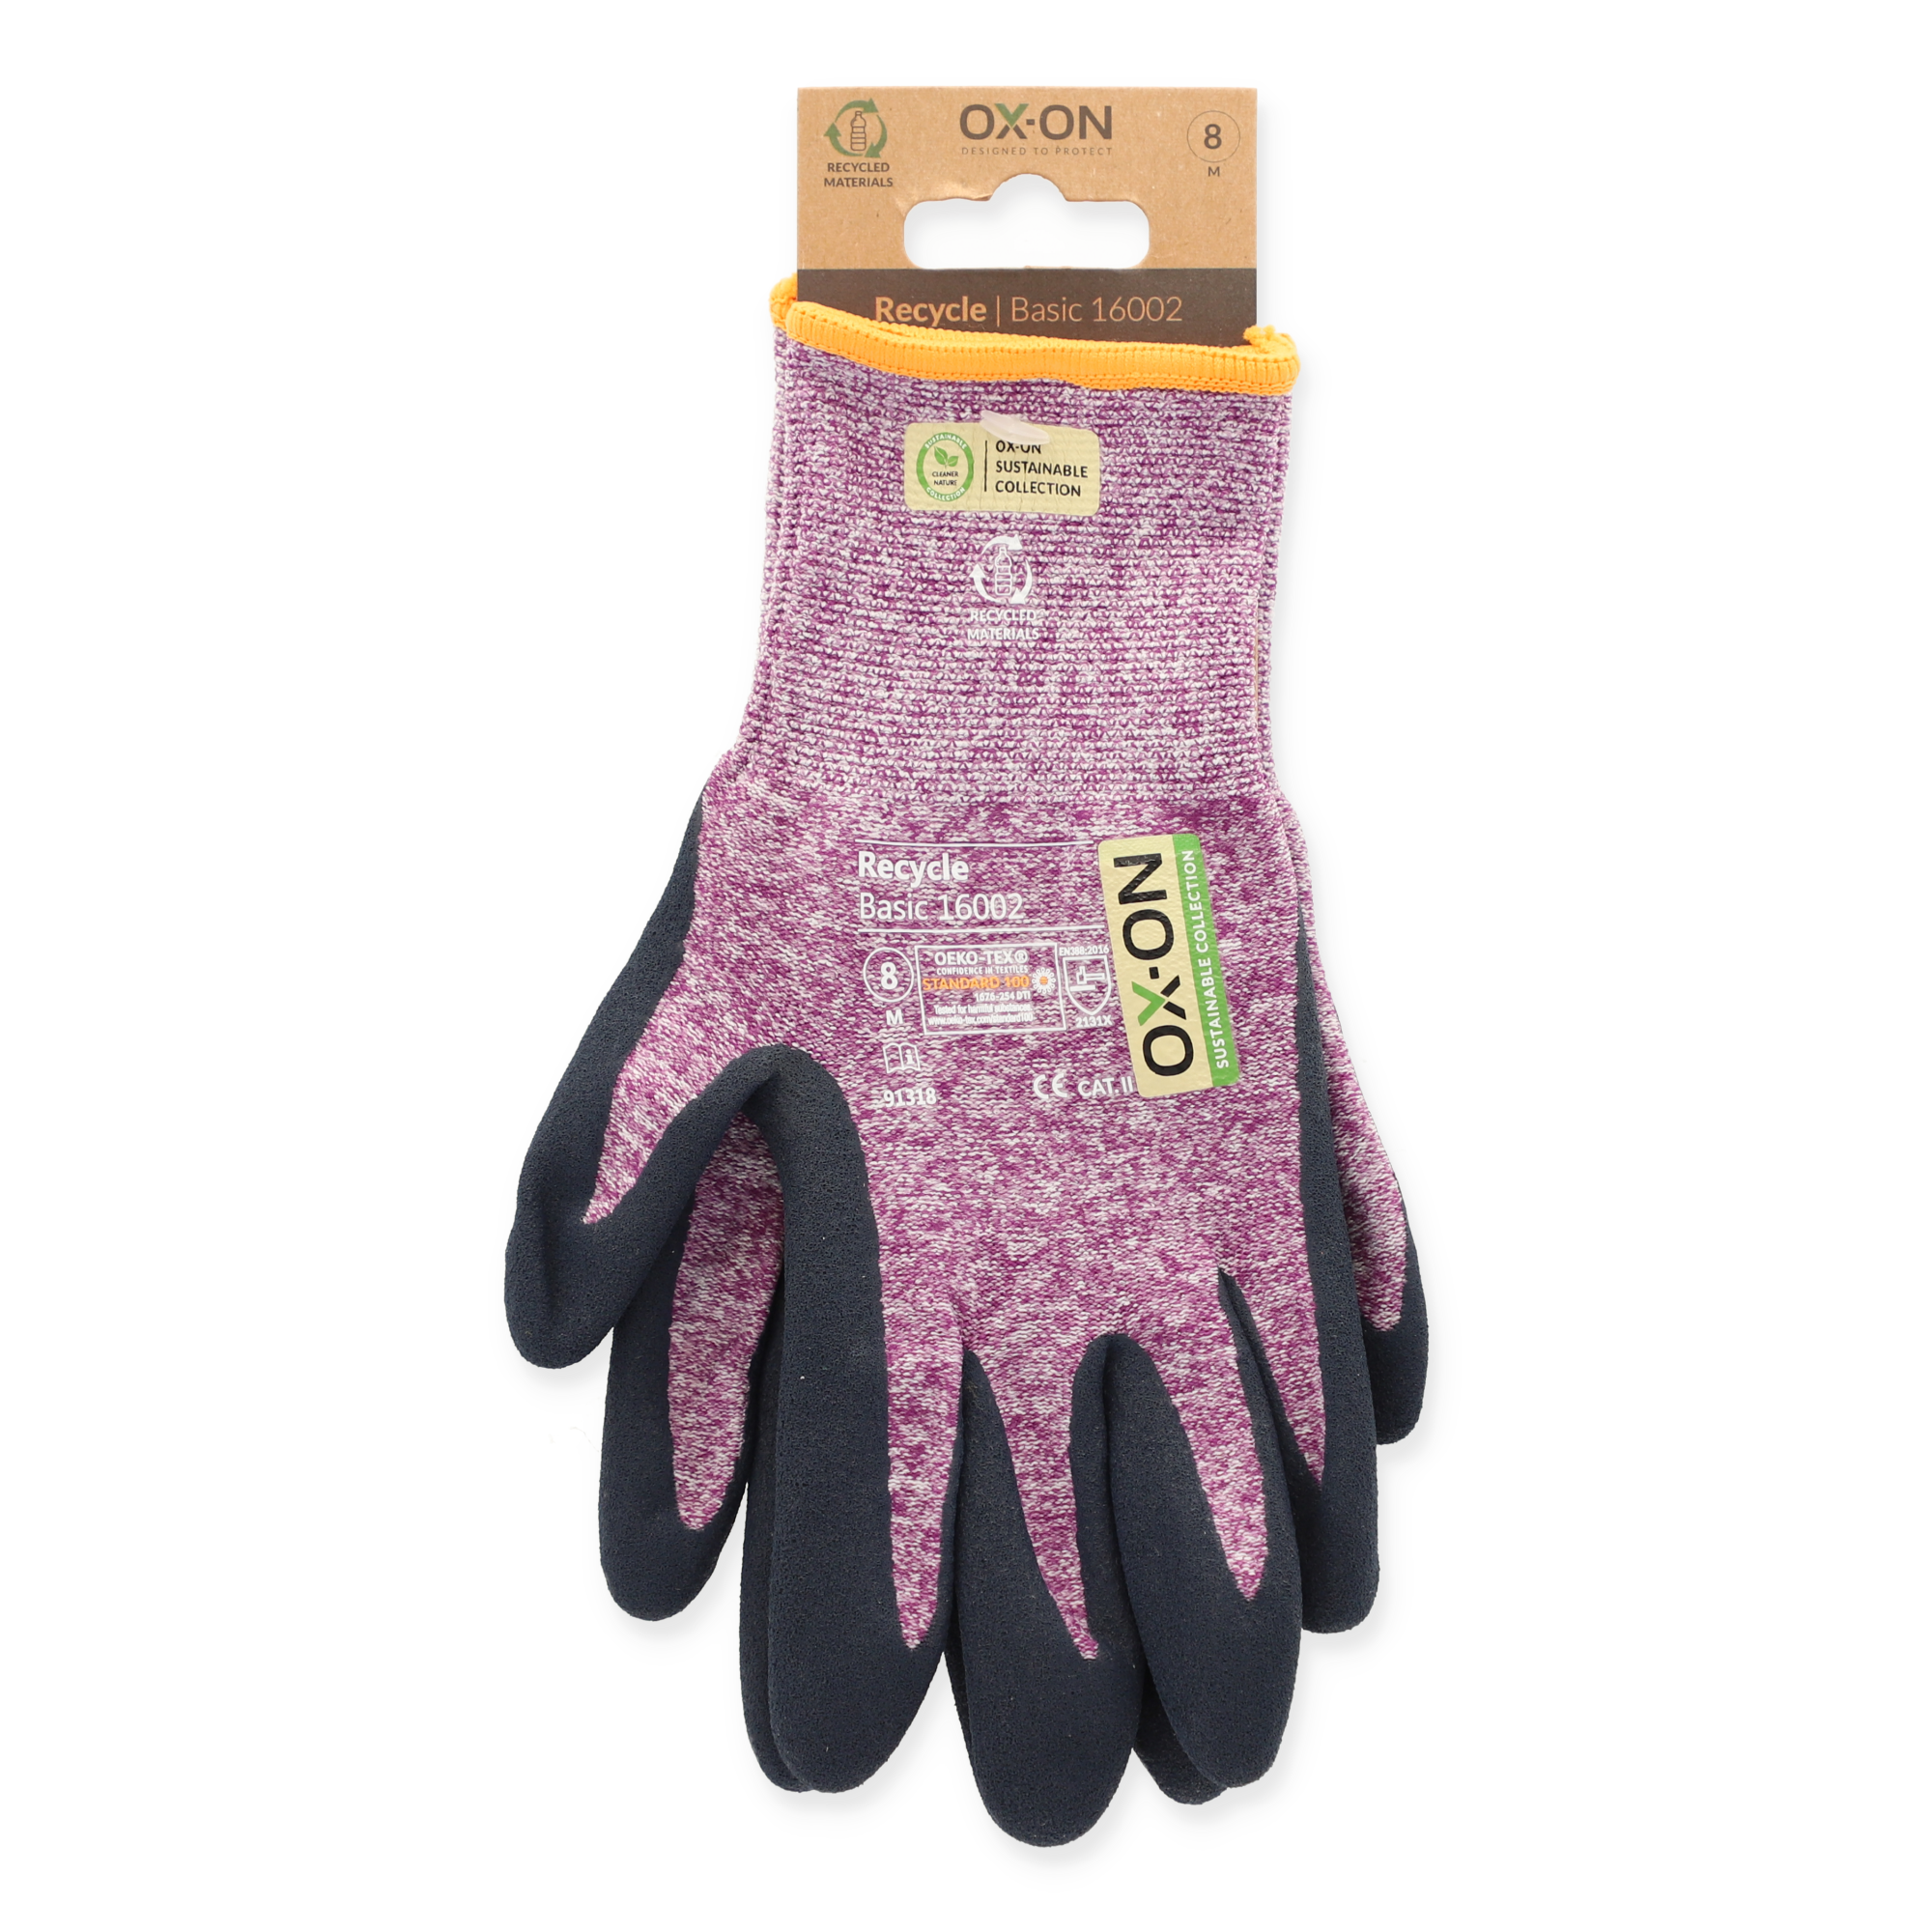 Handschuhe 'Recycle Basic 16002' violett Gr. 7 + product picture